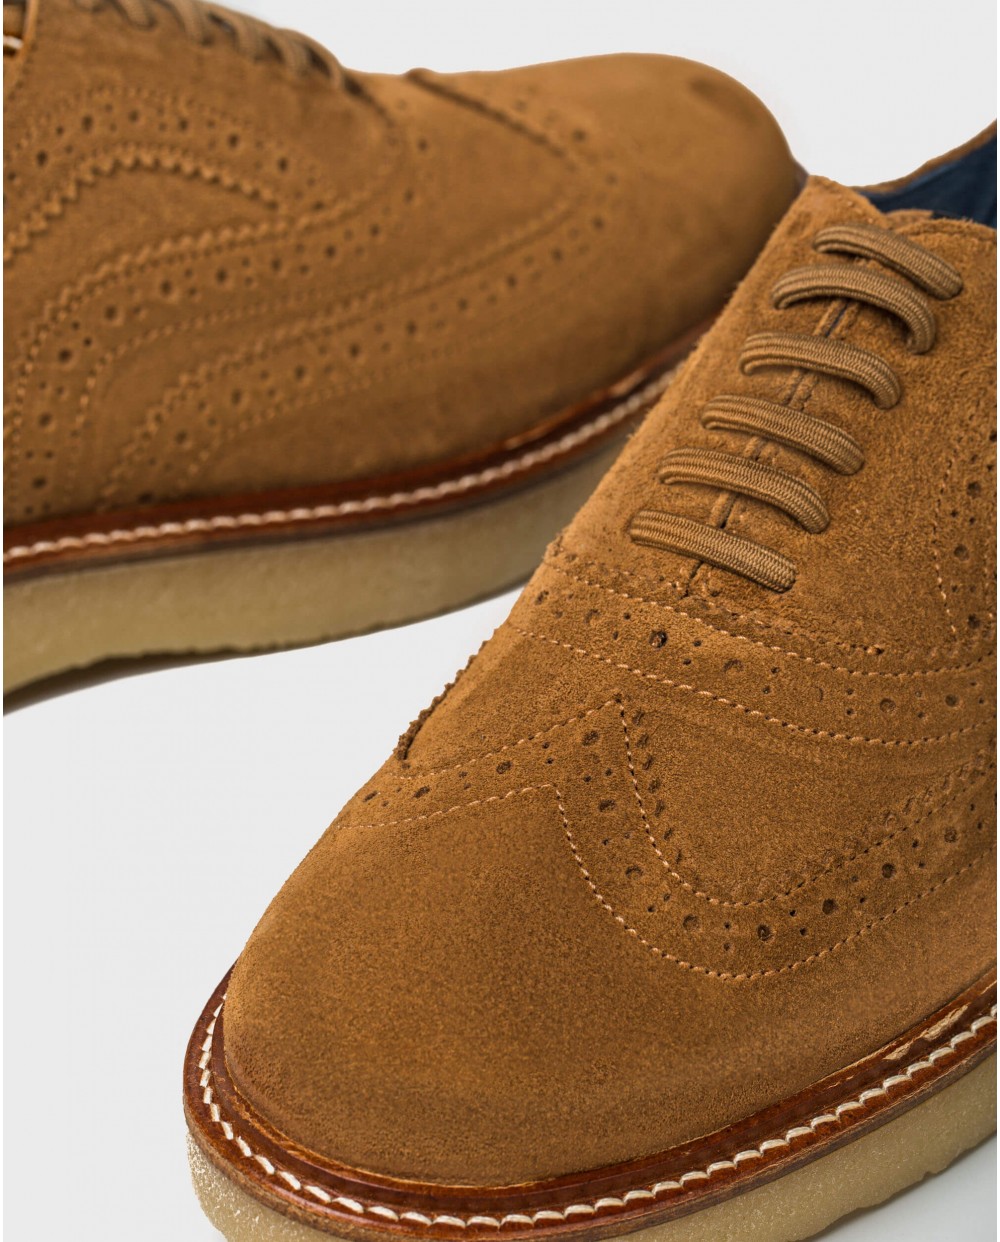 Wonders-Outlet-Leather shoe with brogue detail